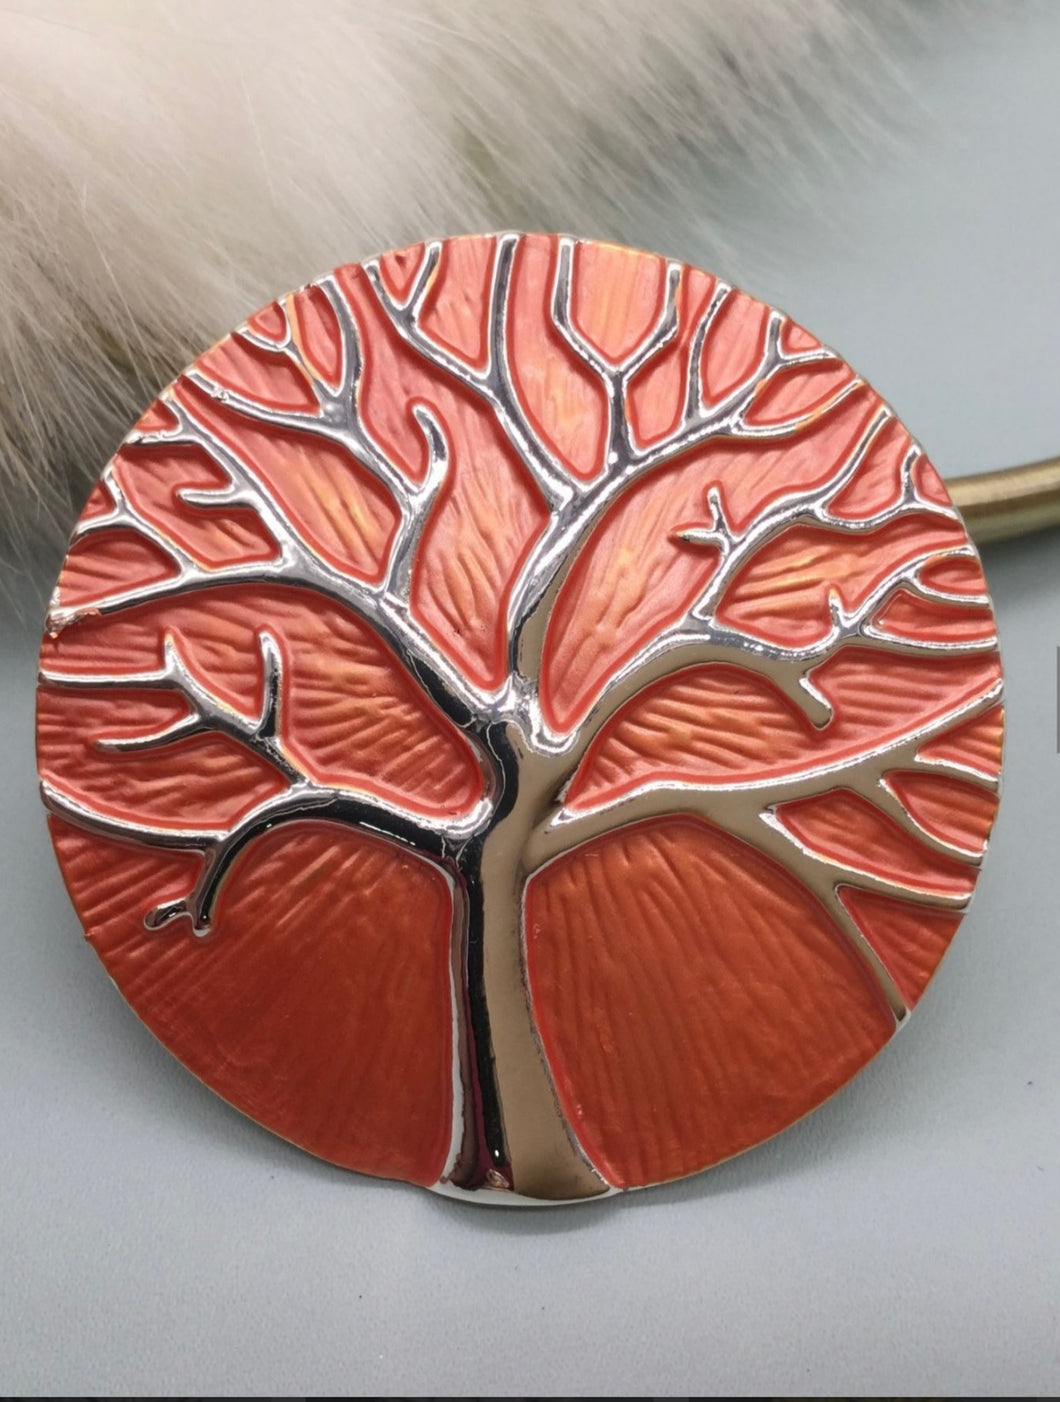 Orange Tree of Life magnetic scarf clip or broach.